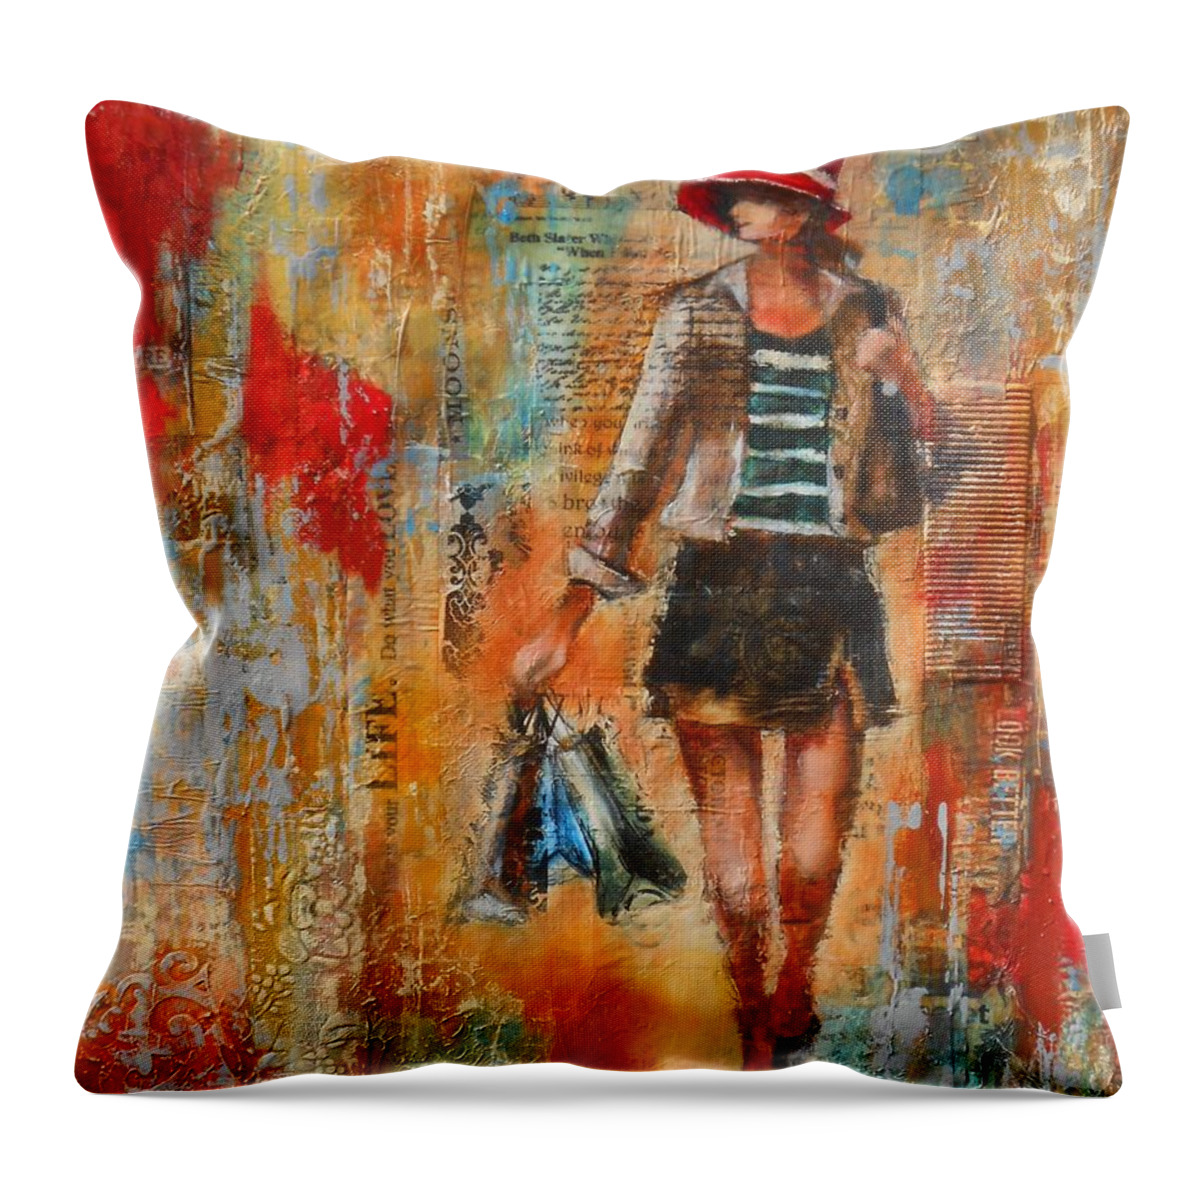 Lady Throw Pillow featuring the painting Abstract Lady 7 by Susan Goh